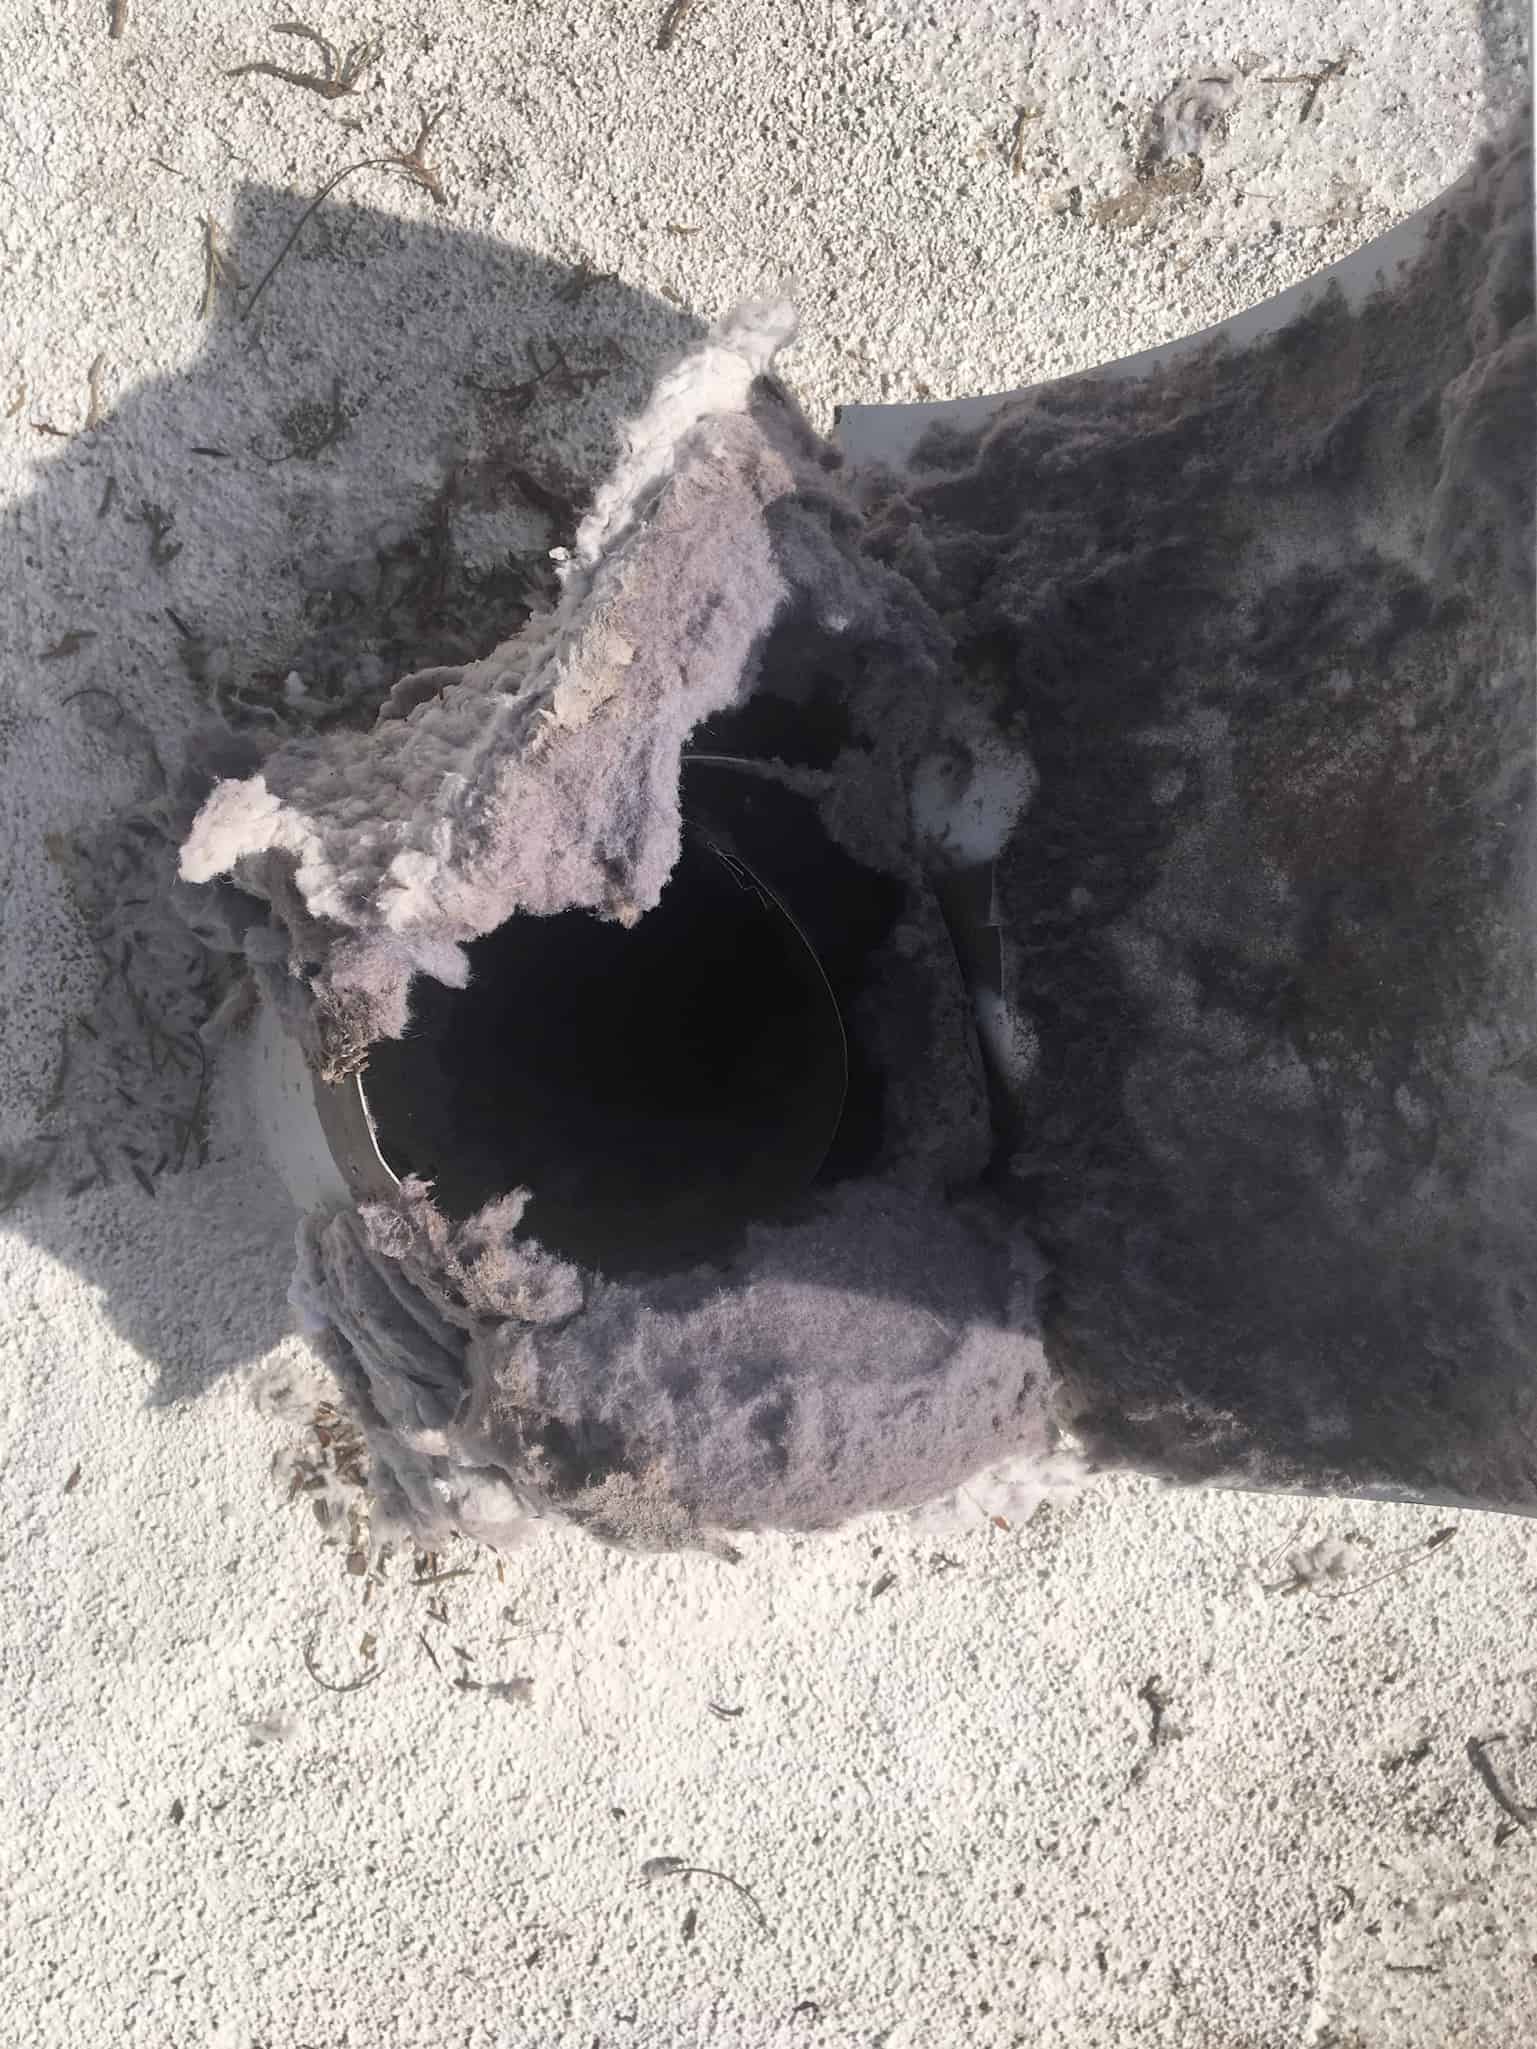 Dryer Vent Cleaning in Ahwatukee Foothills Village, Phoenix, AZ